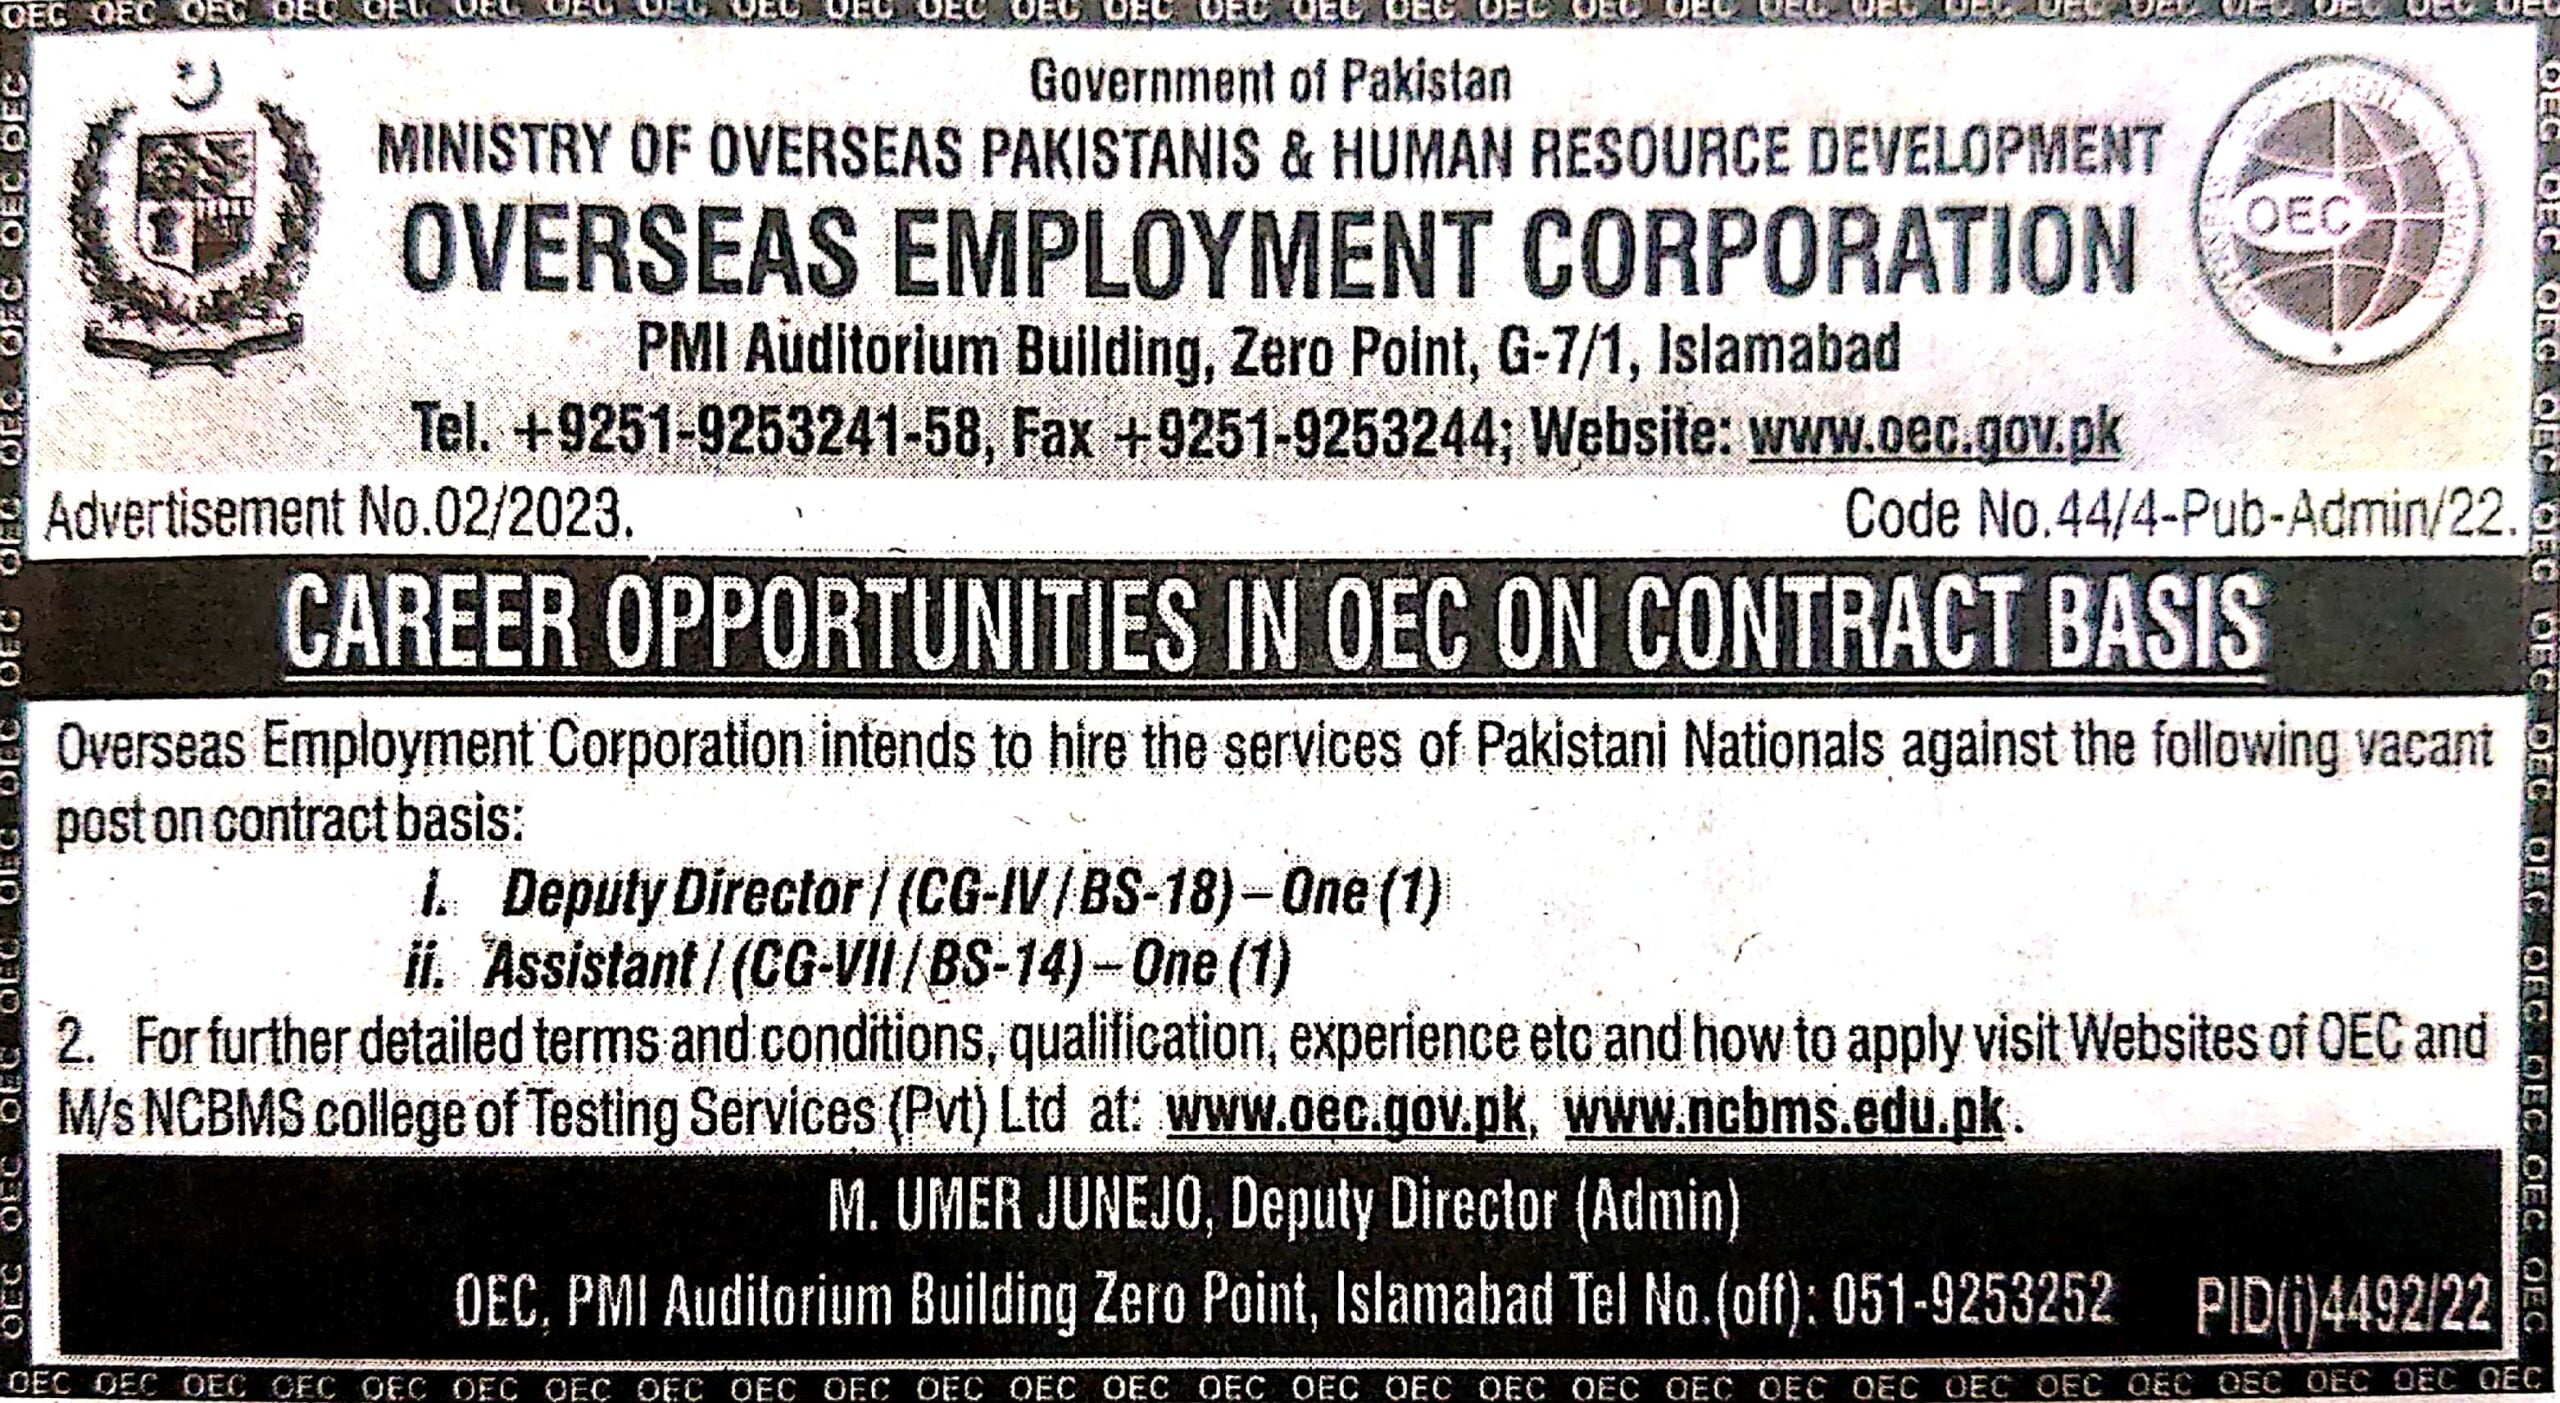 Best Jobs in Ministry of Overseas Pakistani (Government Jobs)